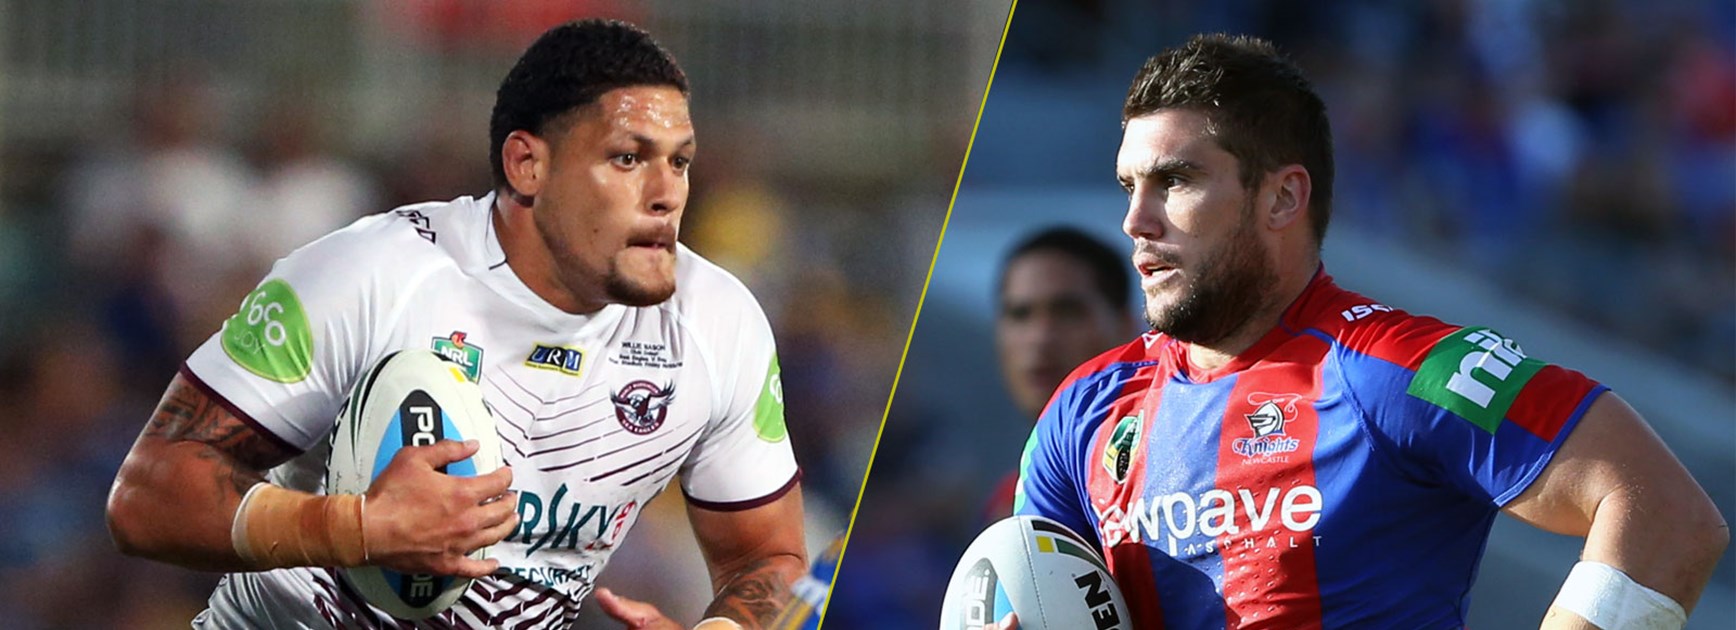 Willie Mason goes up against his former club the Knights and in-form prop Kade Snoden this weekend.